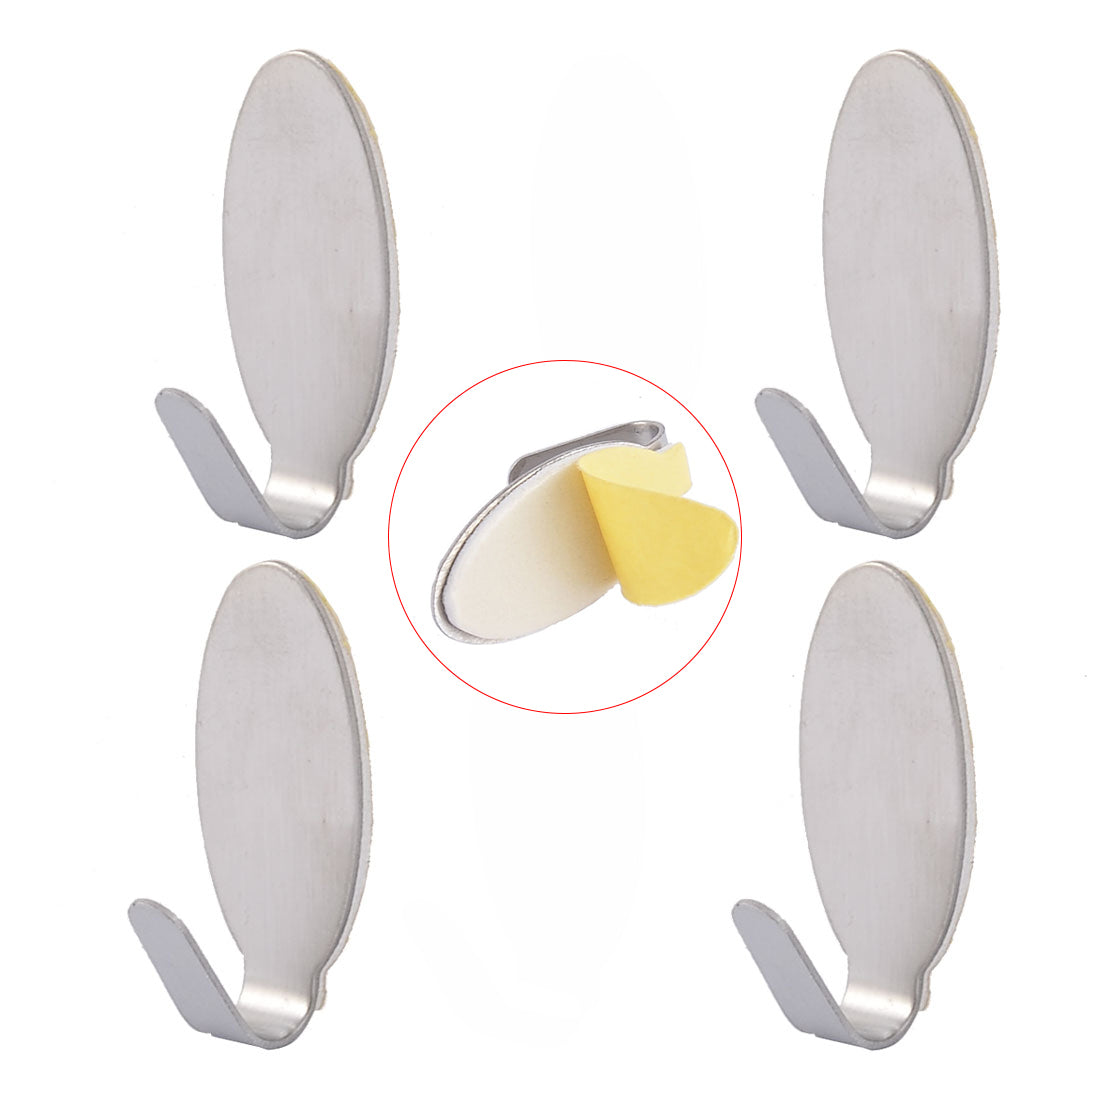 uxcell Uxcell Home Bathroom Bedroom Kitchen Stainless Steel Oval Shaped Self Adhesive Wall Hooks Hanger 6pcs